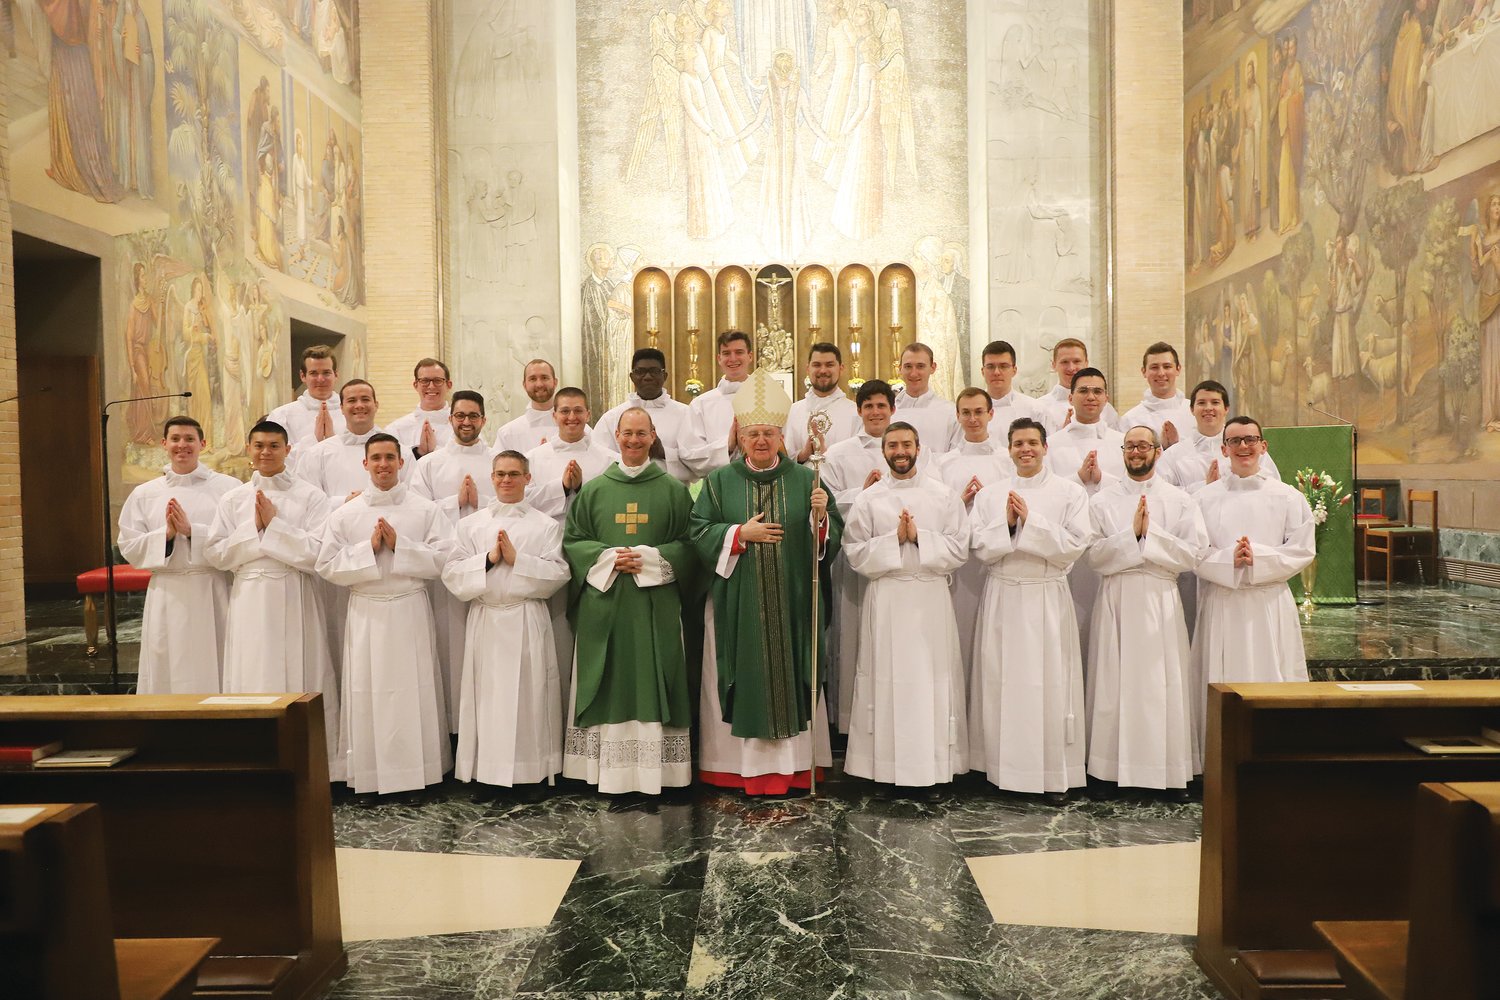 Twenty-five seminarians, including three young men from the Diocese of Providence: Pictured in next slides, Stephen Coutcher, Nathan Ledoux and Mateusz Puzanowski receive the Ministry of Lector, conferred by His Eminence Arthur Cardinal Roche, Prefect of the Dicastery for Divine Worship and the Discipline of the Sacraments on January 15 in Rome.